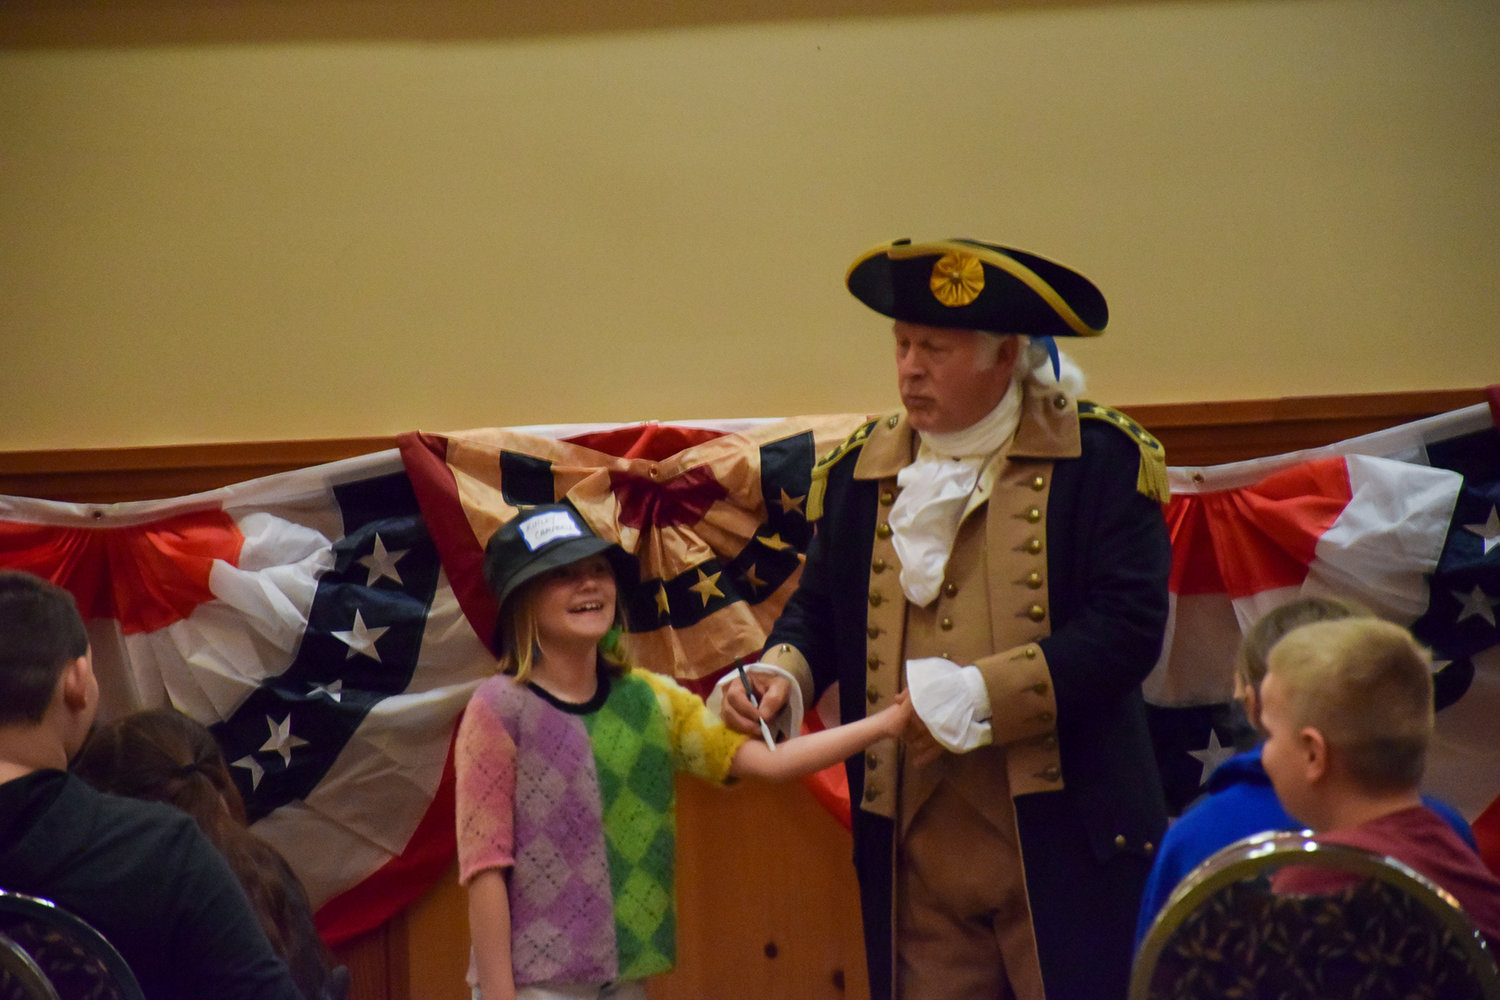 George Washington reenactor Vern Frykholm, with the help of student Kinley Campbell, instructs Tukes Valley Middle School students on medical practices in colonial America during the Sons of the American Revolution convention at the Heathman Lodge on April 9.